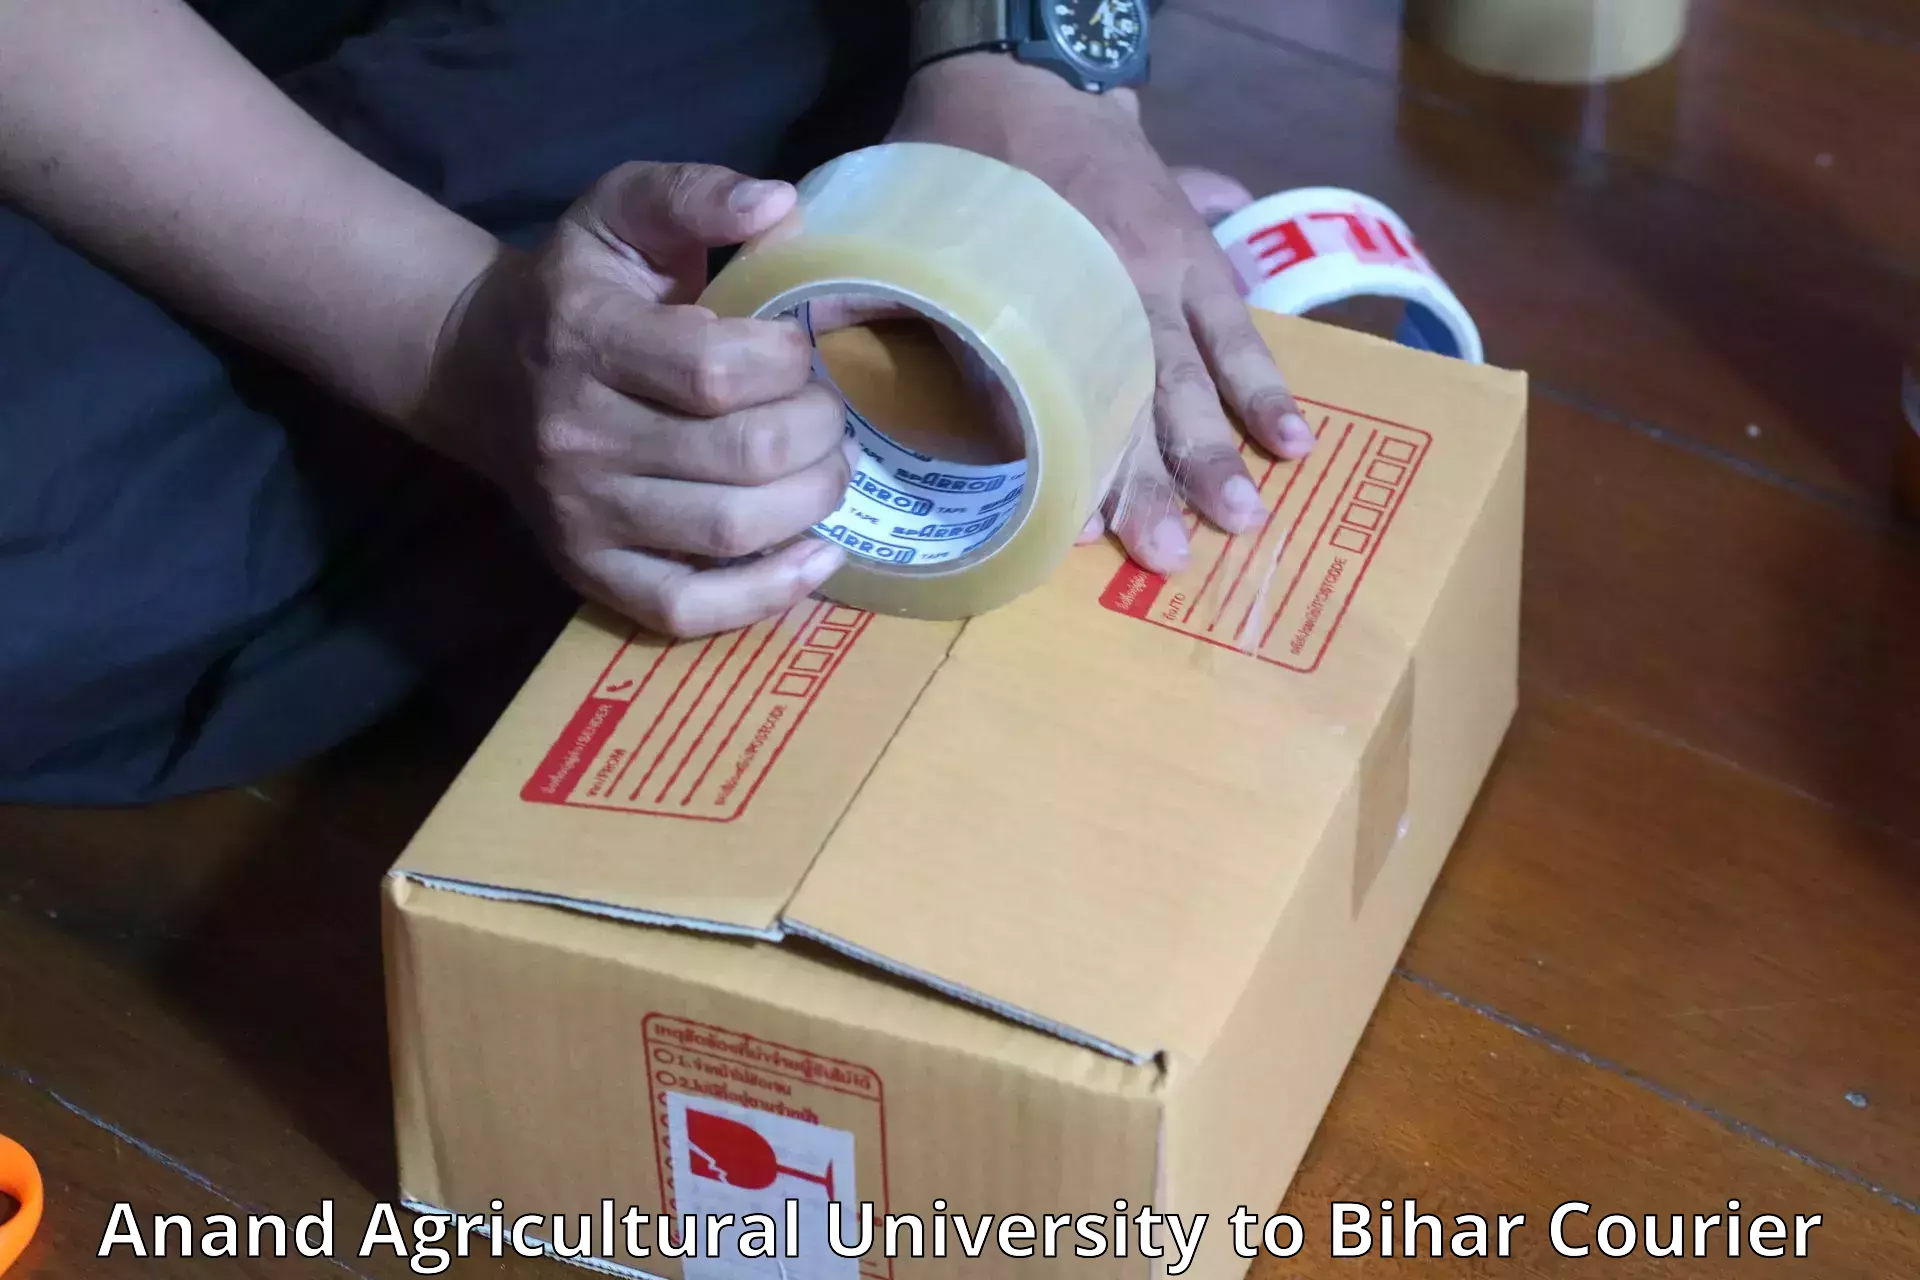 Express luggage delivery Anand Agricultural University to Bhojpur